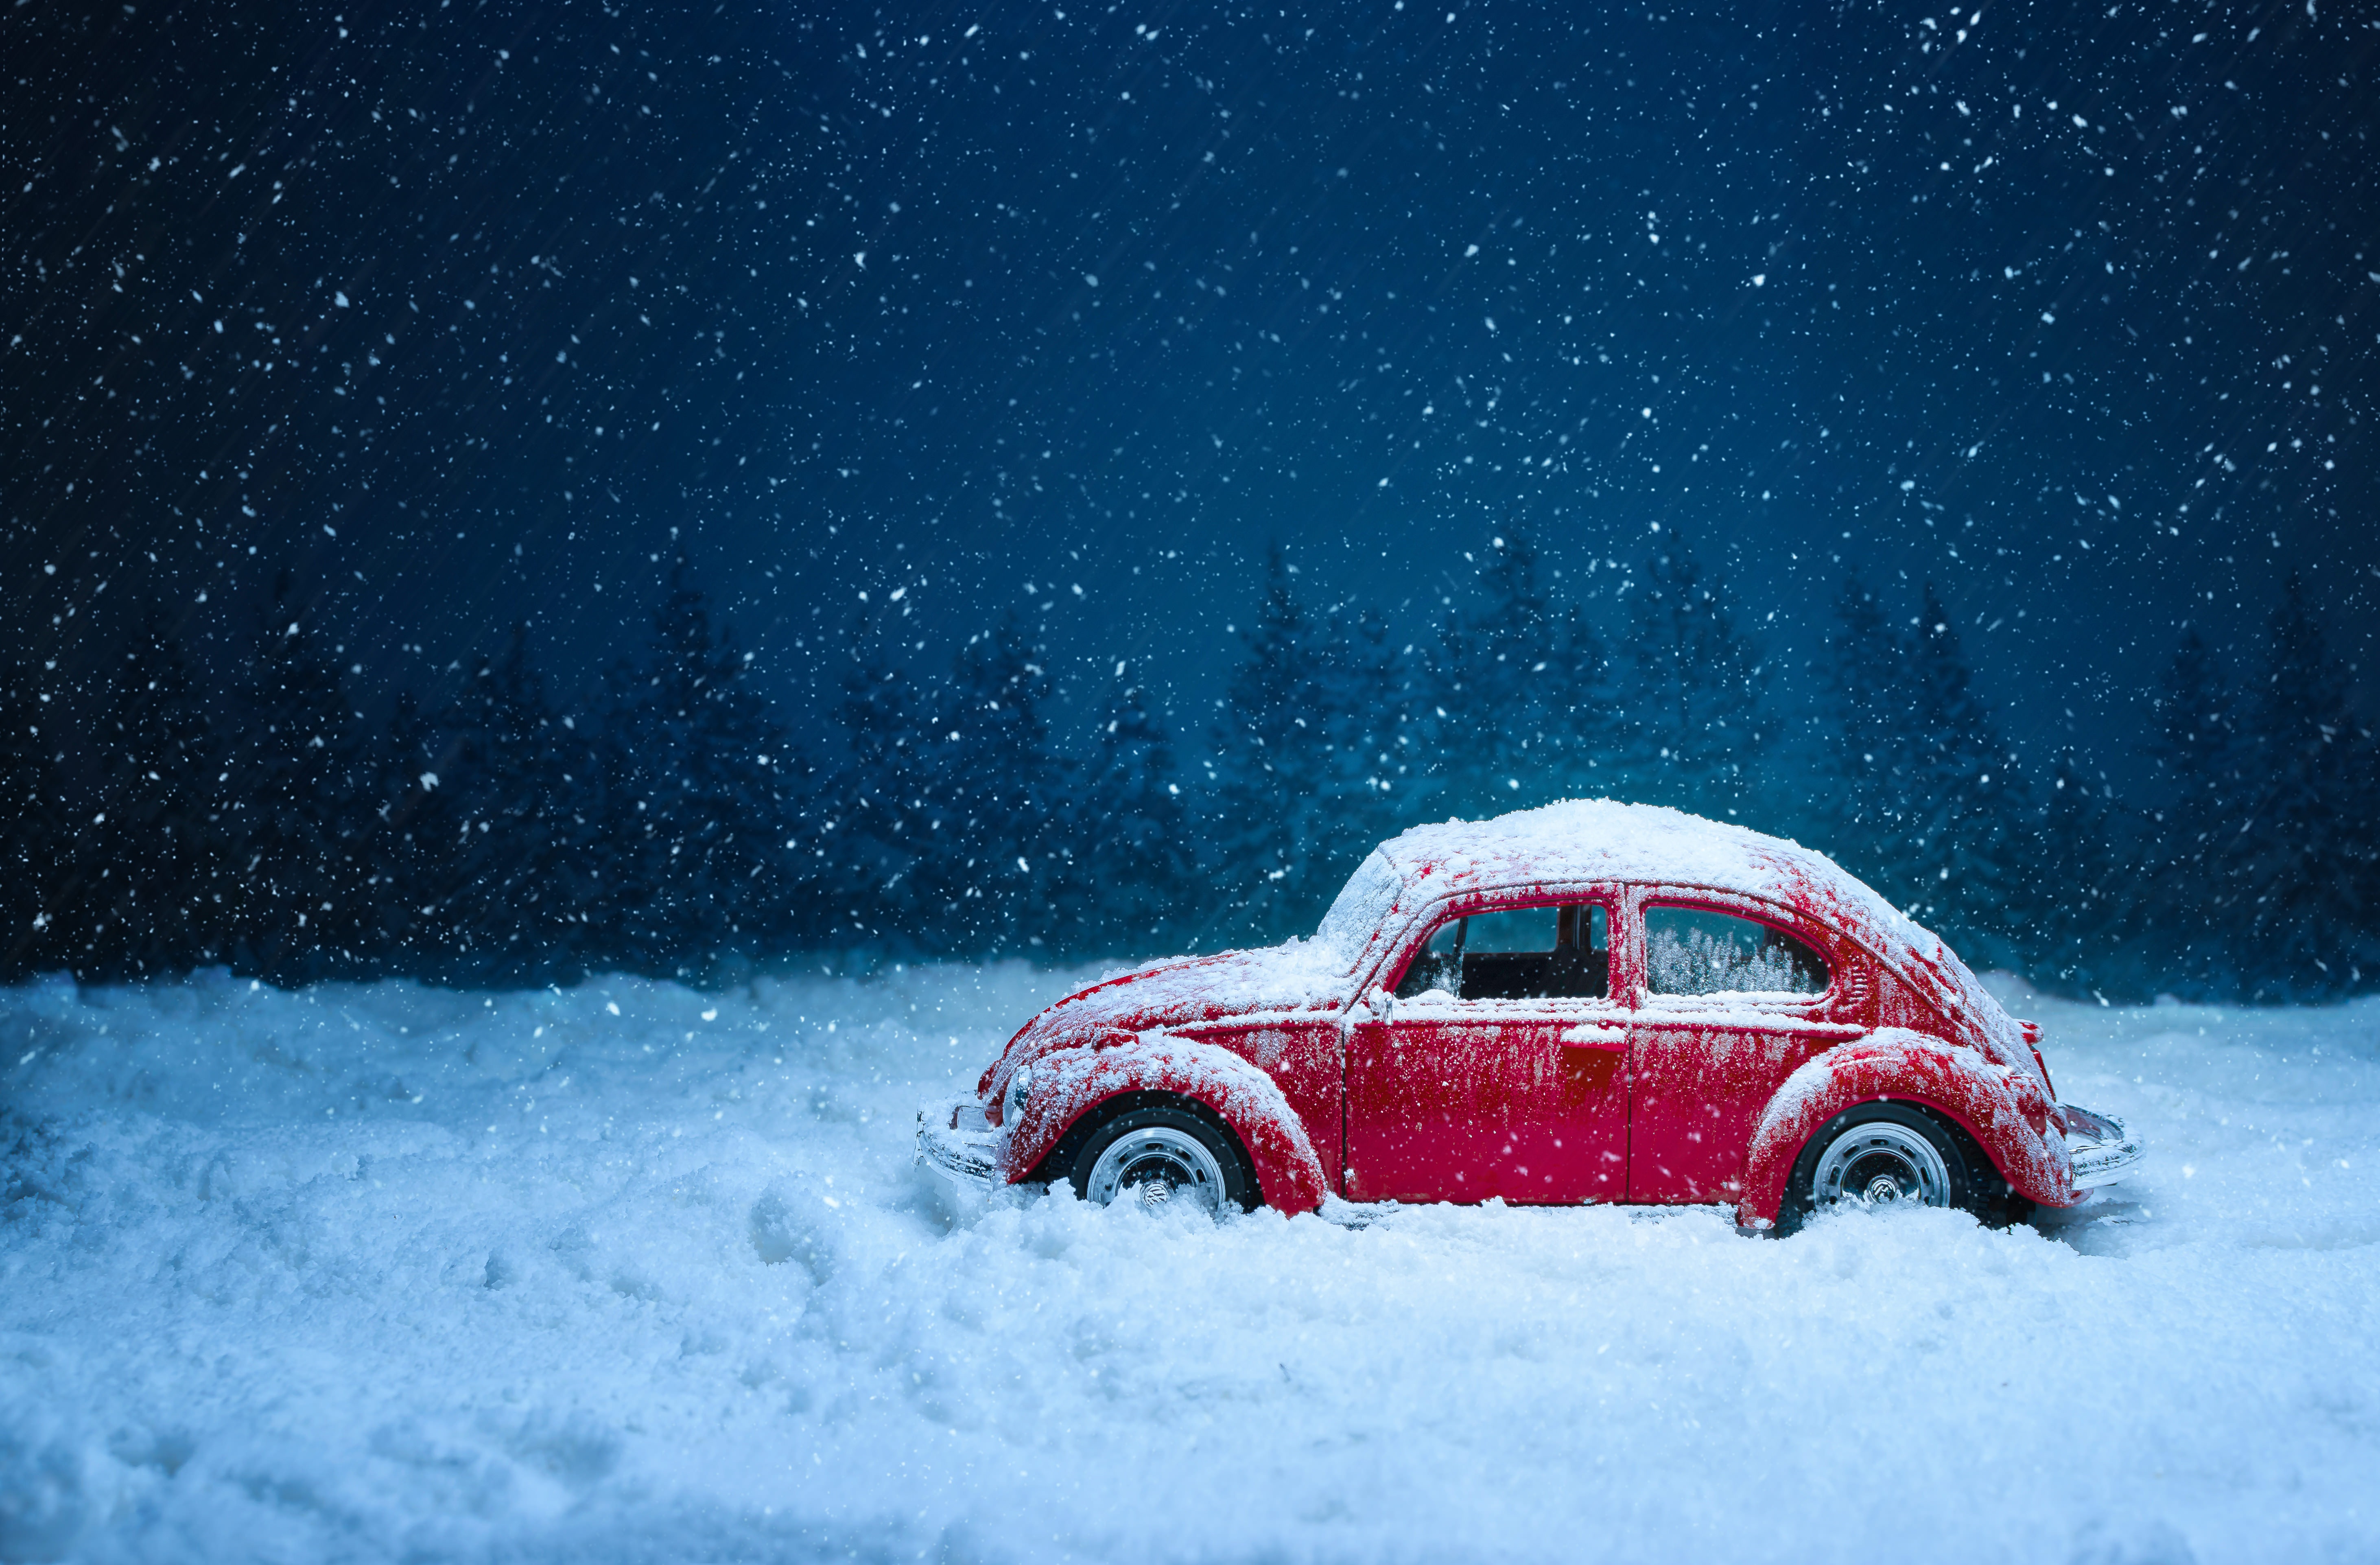 android snow, winter, snowfall, retro, cars, red, car, old, vintage